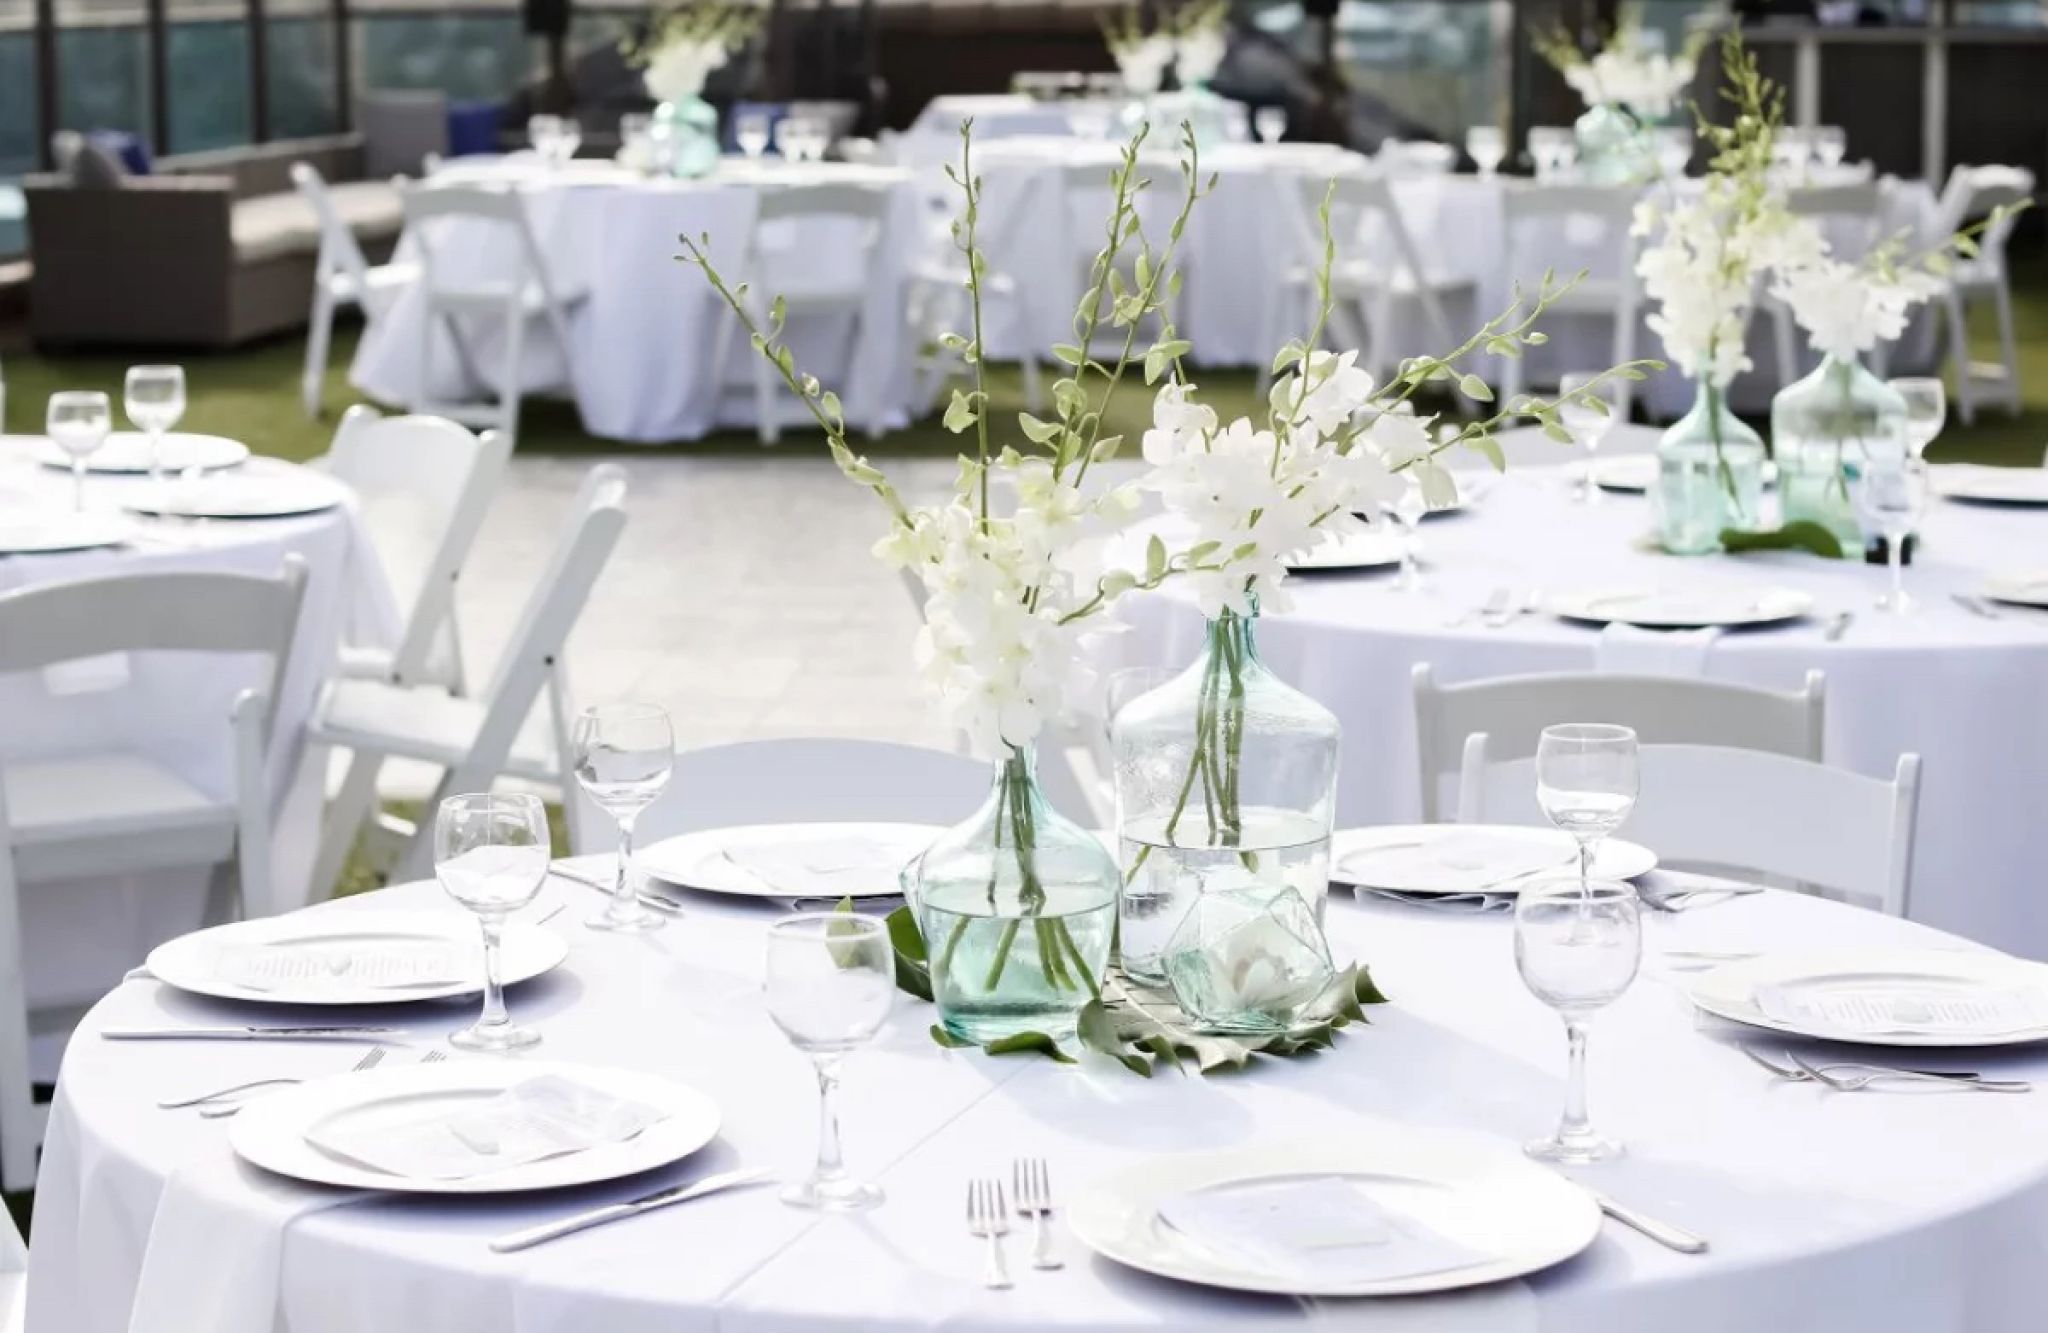 Bayside rooftop meeting space with beautiful table settings